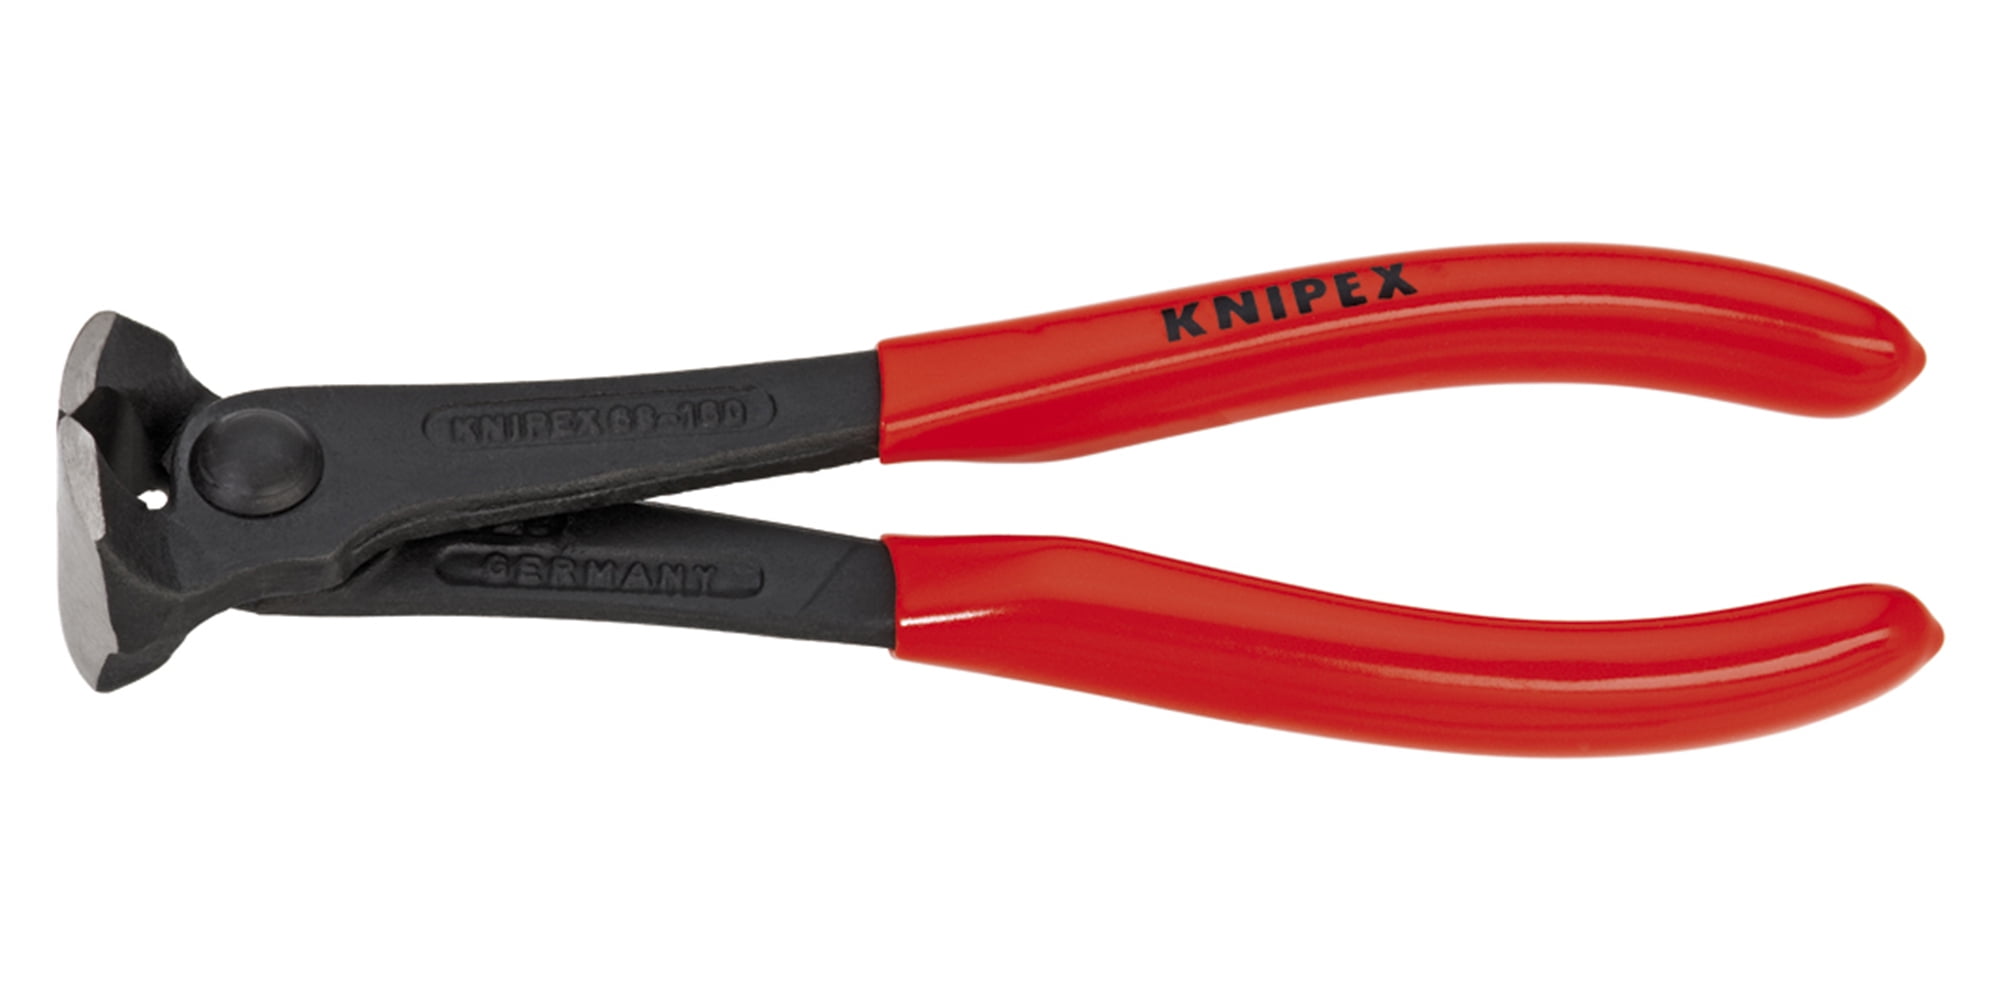 KNIPEX 99 01 250 Concretors Nippers Cushion Grip for sale online 